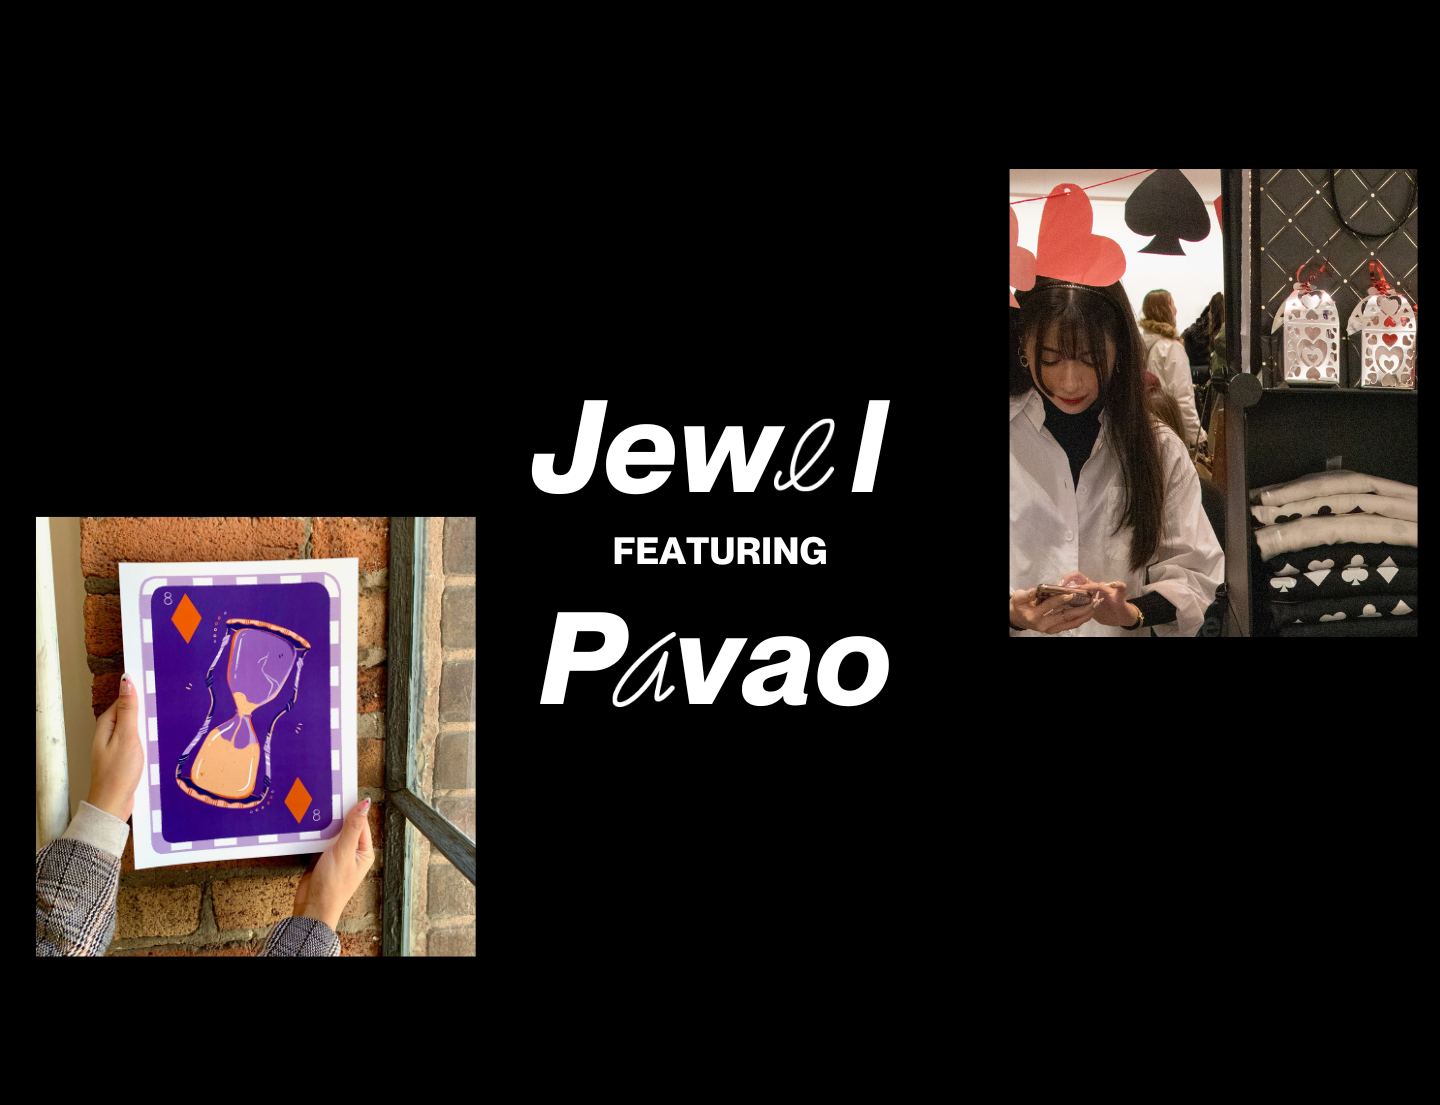 Banner image reading "Featuring Jewel Pavao", with two of her pieces